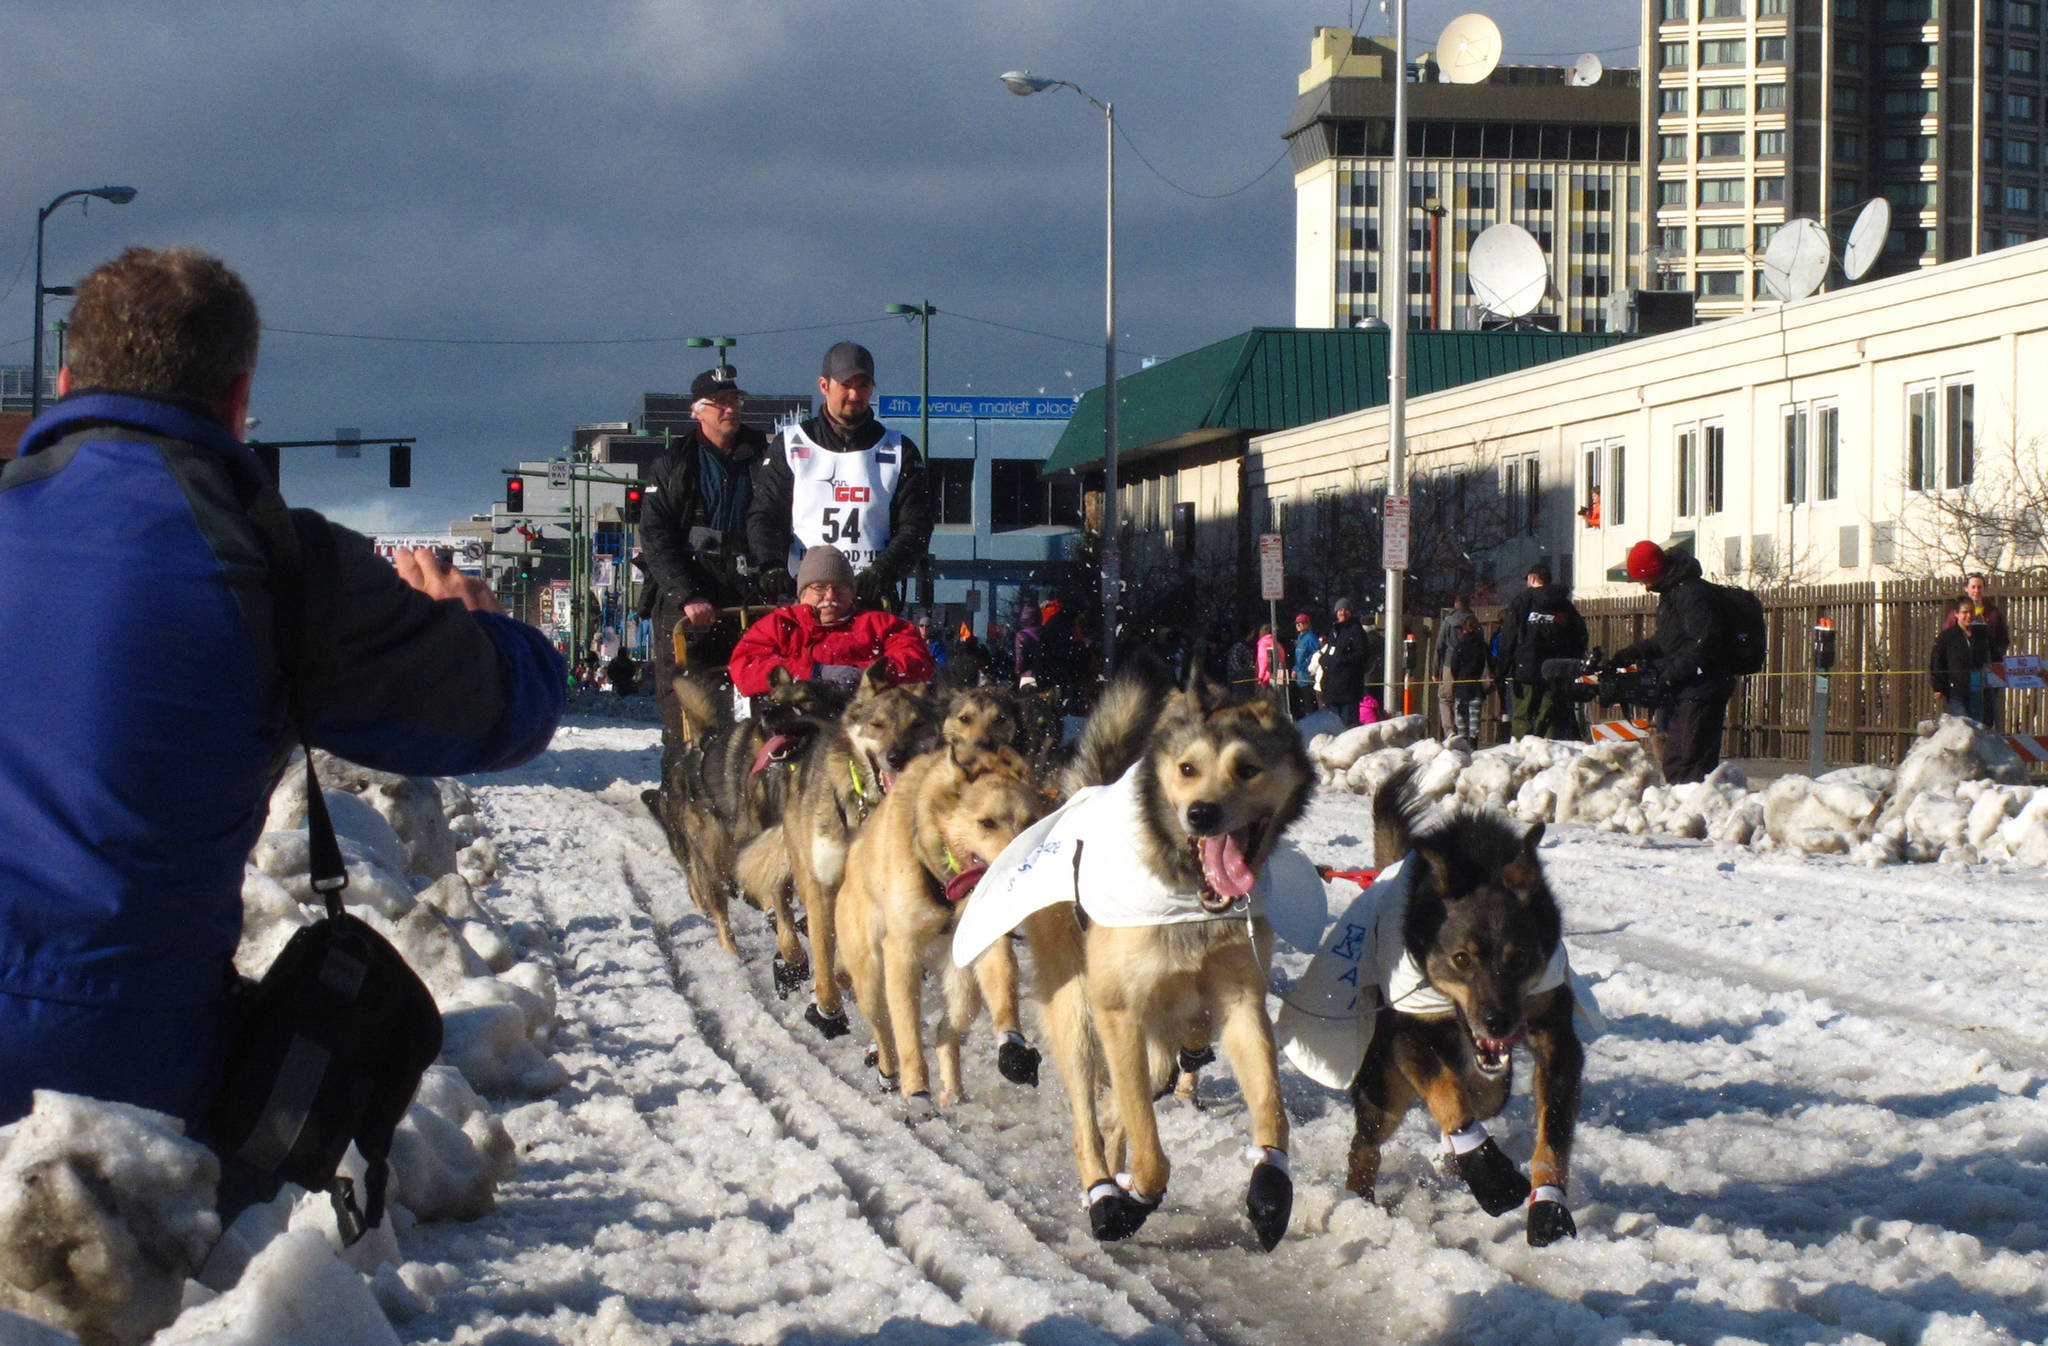 In this March 7, 2015, file photo, musher Peter Kaiser, of Bethel, Alaska, leads his team past spectators during the ceremonial start of the Iditarod Trail Sled Dog Race, in Anchorage, Alaska. PETA is the biggest critic of the world’s most famous sled dog race, but new Iditarod CEO Rob Urbach has started discussions with the animal rights group and plans a sit-down meeting with PETA, Thursday, Oct. 17, 2019, in Los Angeles. (AP Photo/Rachel D’Oro, File)